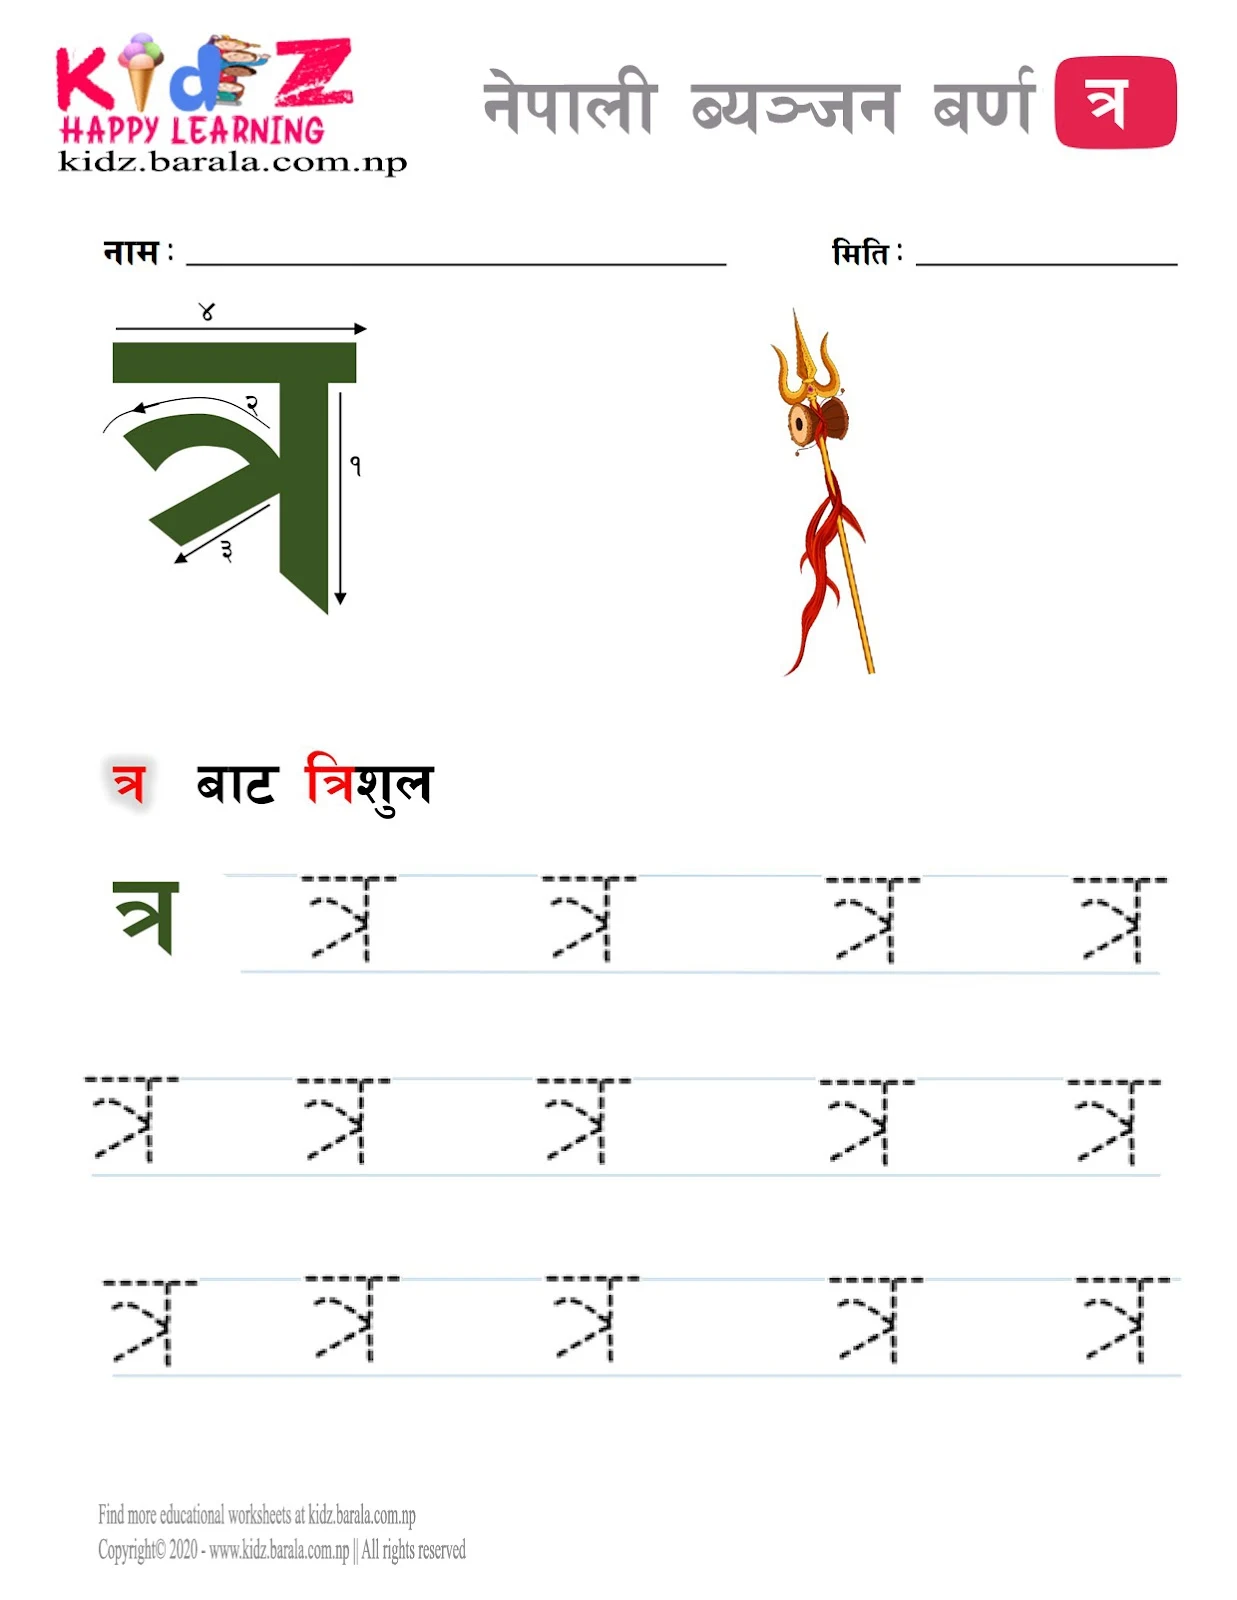 Nepali Consonant letter त्र TRA tracing worksheet free download .pdf